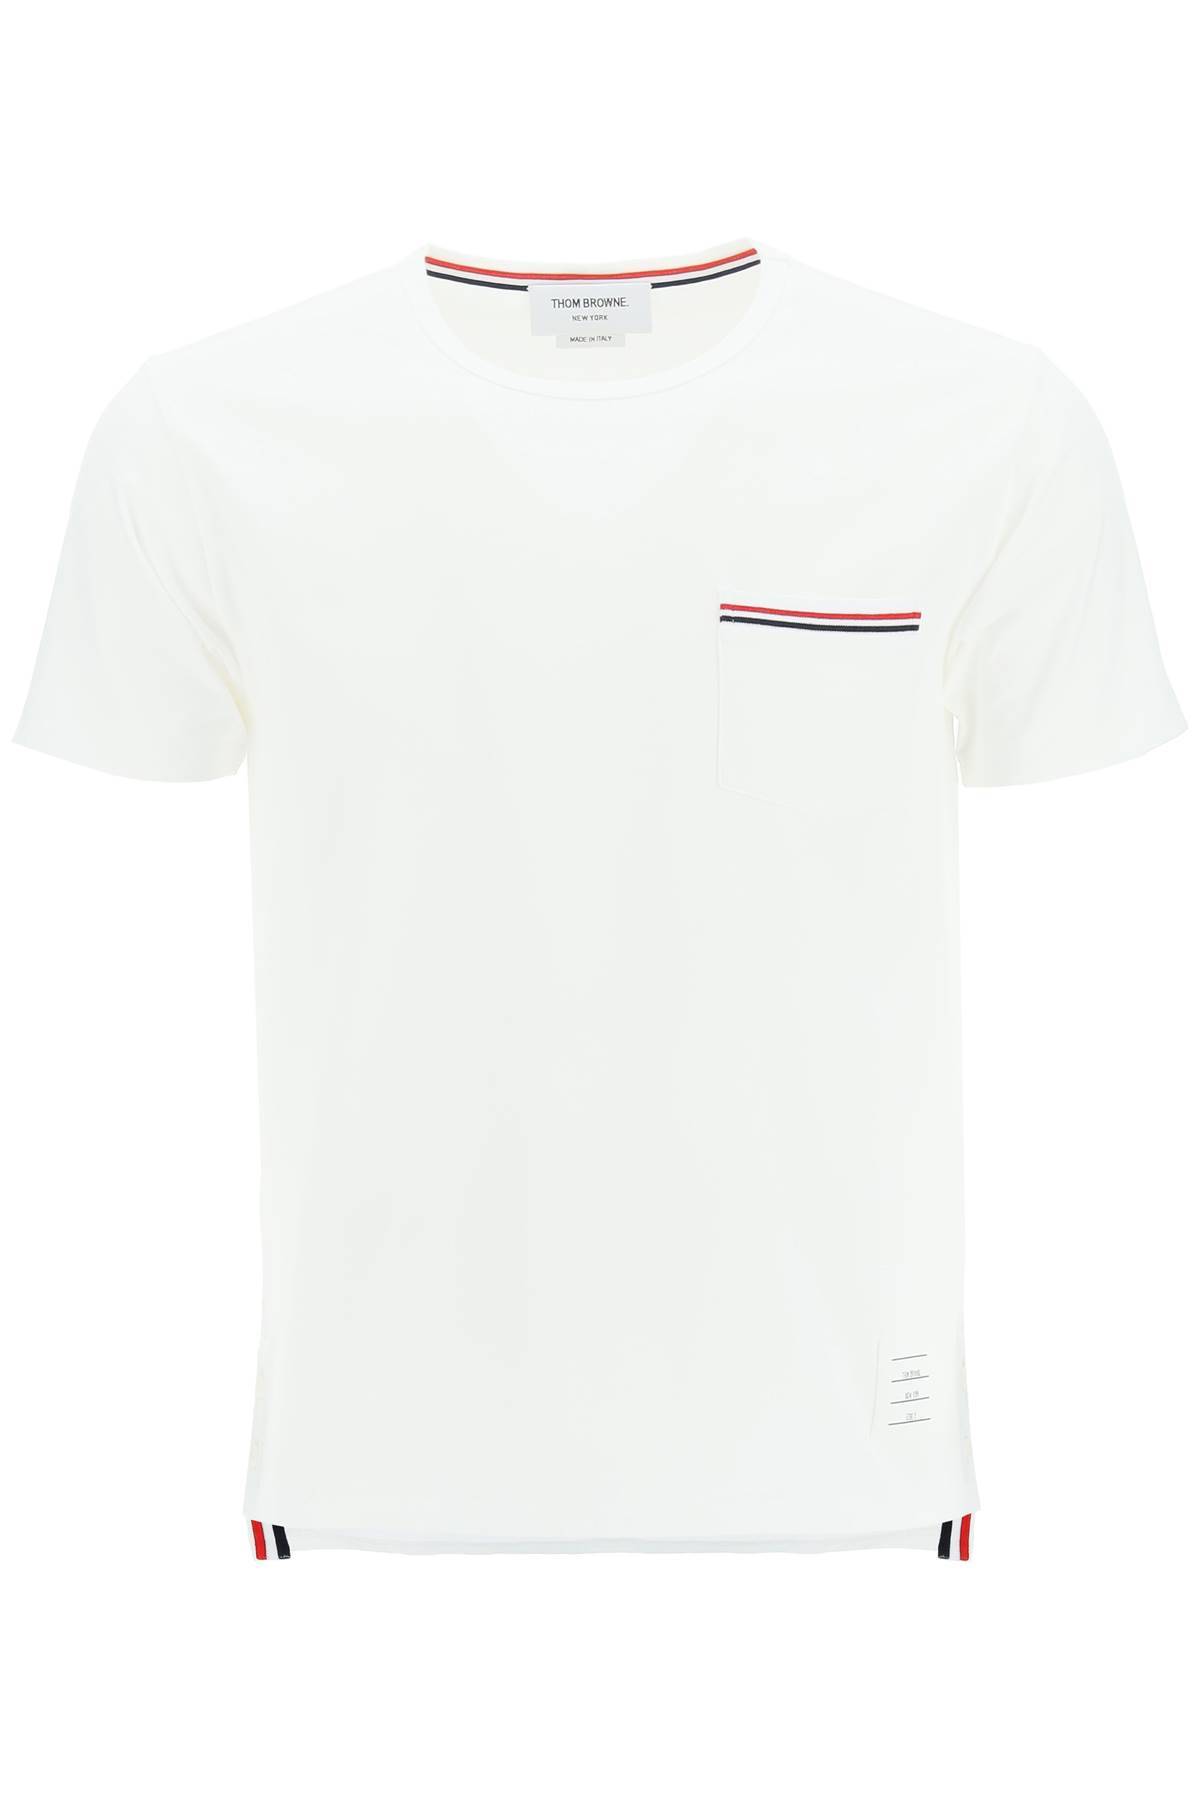 Thom Browne THOM BROWNE t-shirt with chest pocket